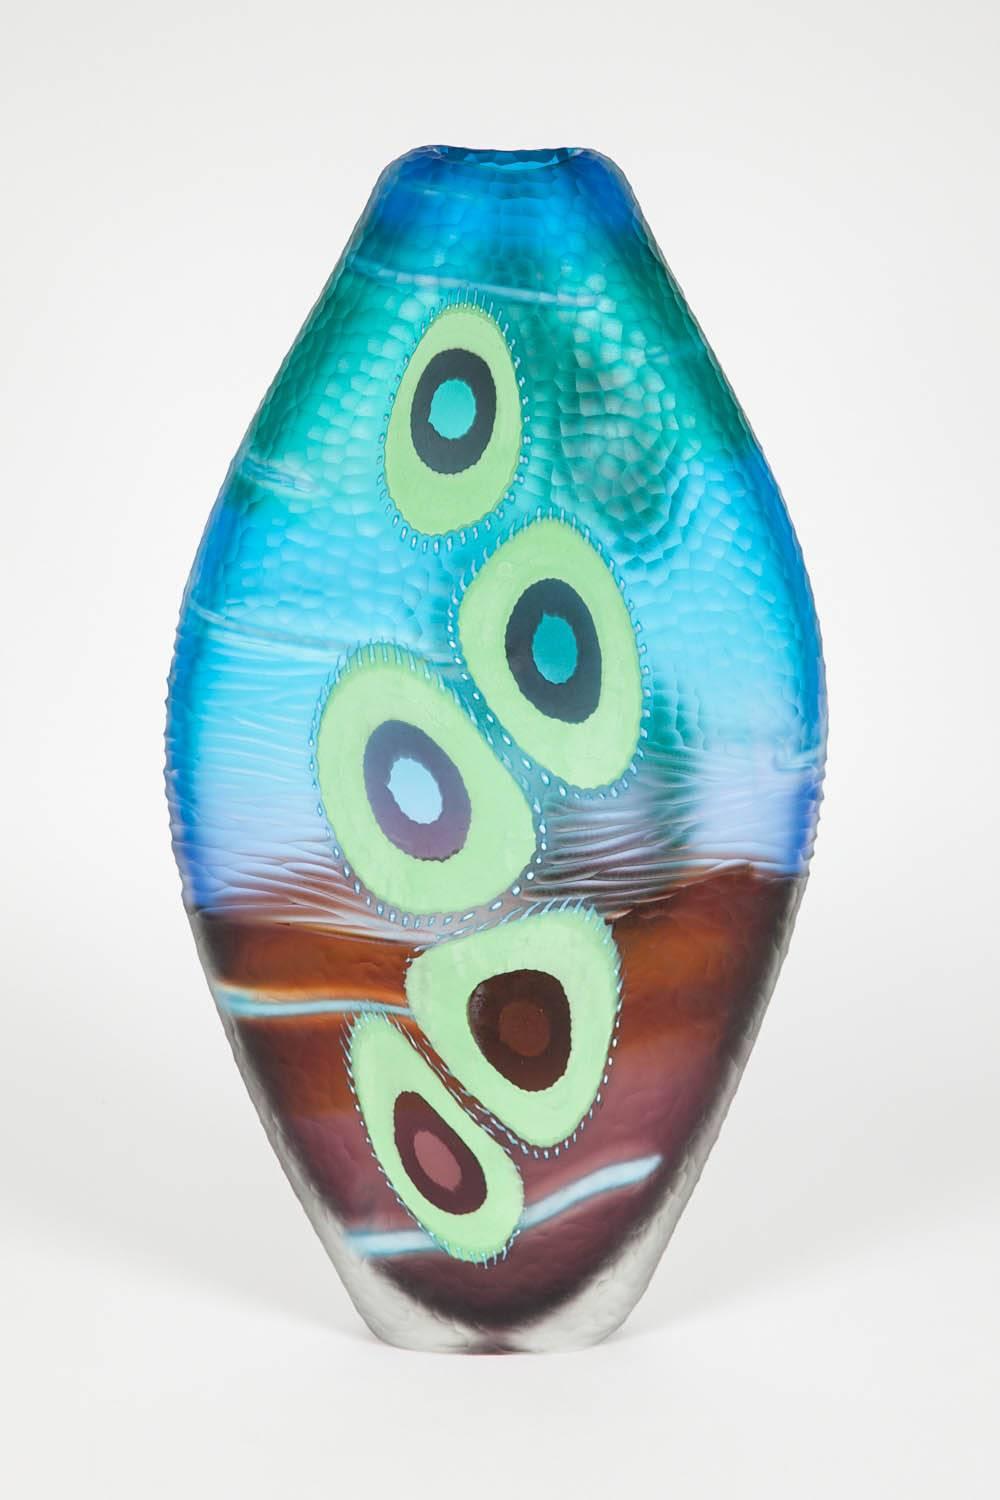 Hand-Crafted Evviva III, a mixed coloured sculptural glass vase by Marco & Mattia Salvadore